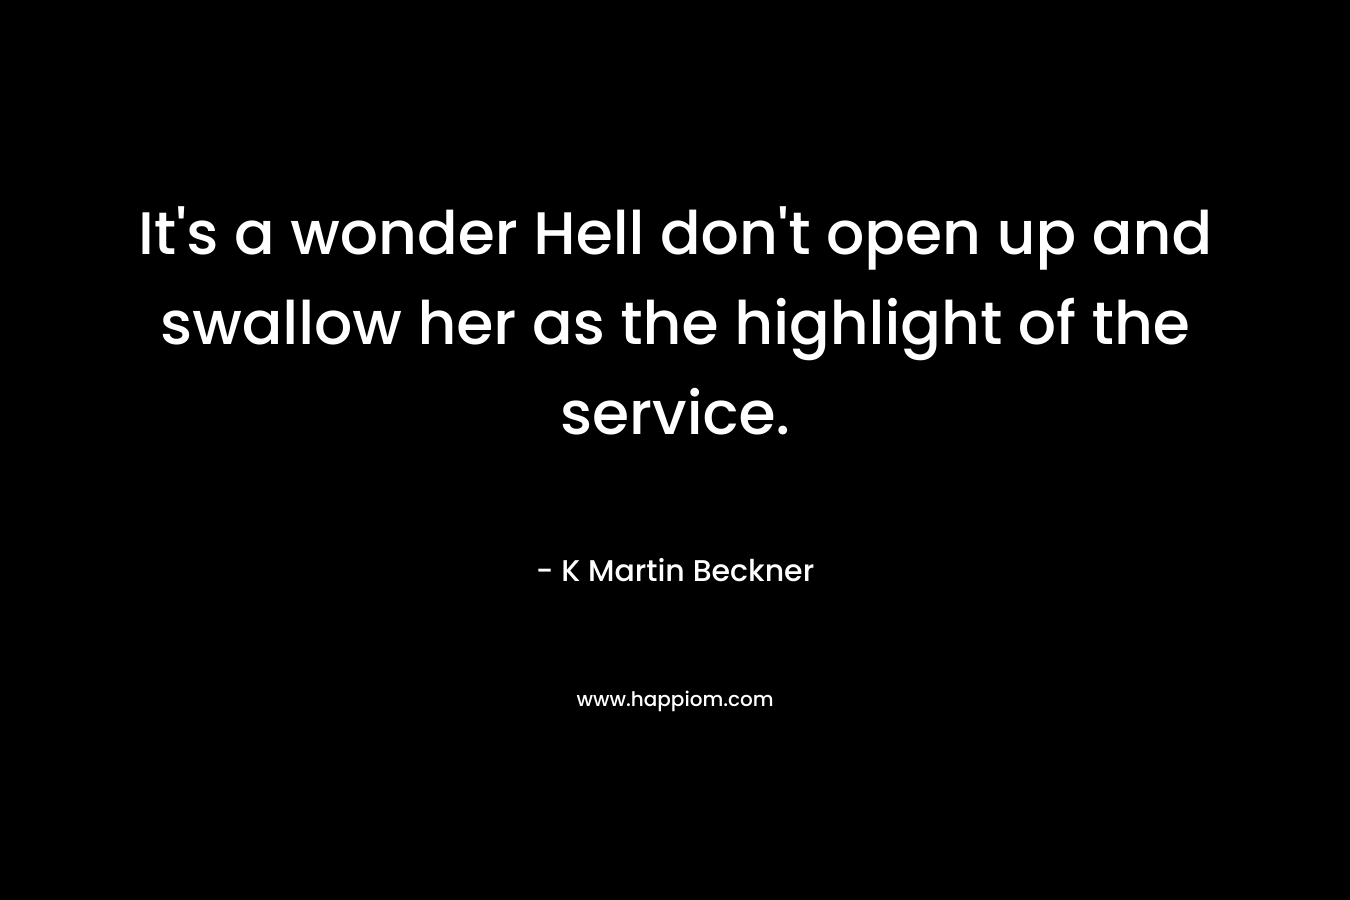 It's a wonder Hell don't open up and swallow her as the highlight of the service.